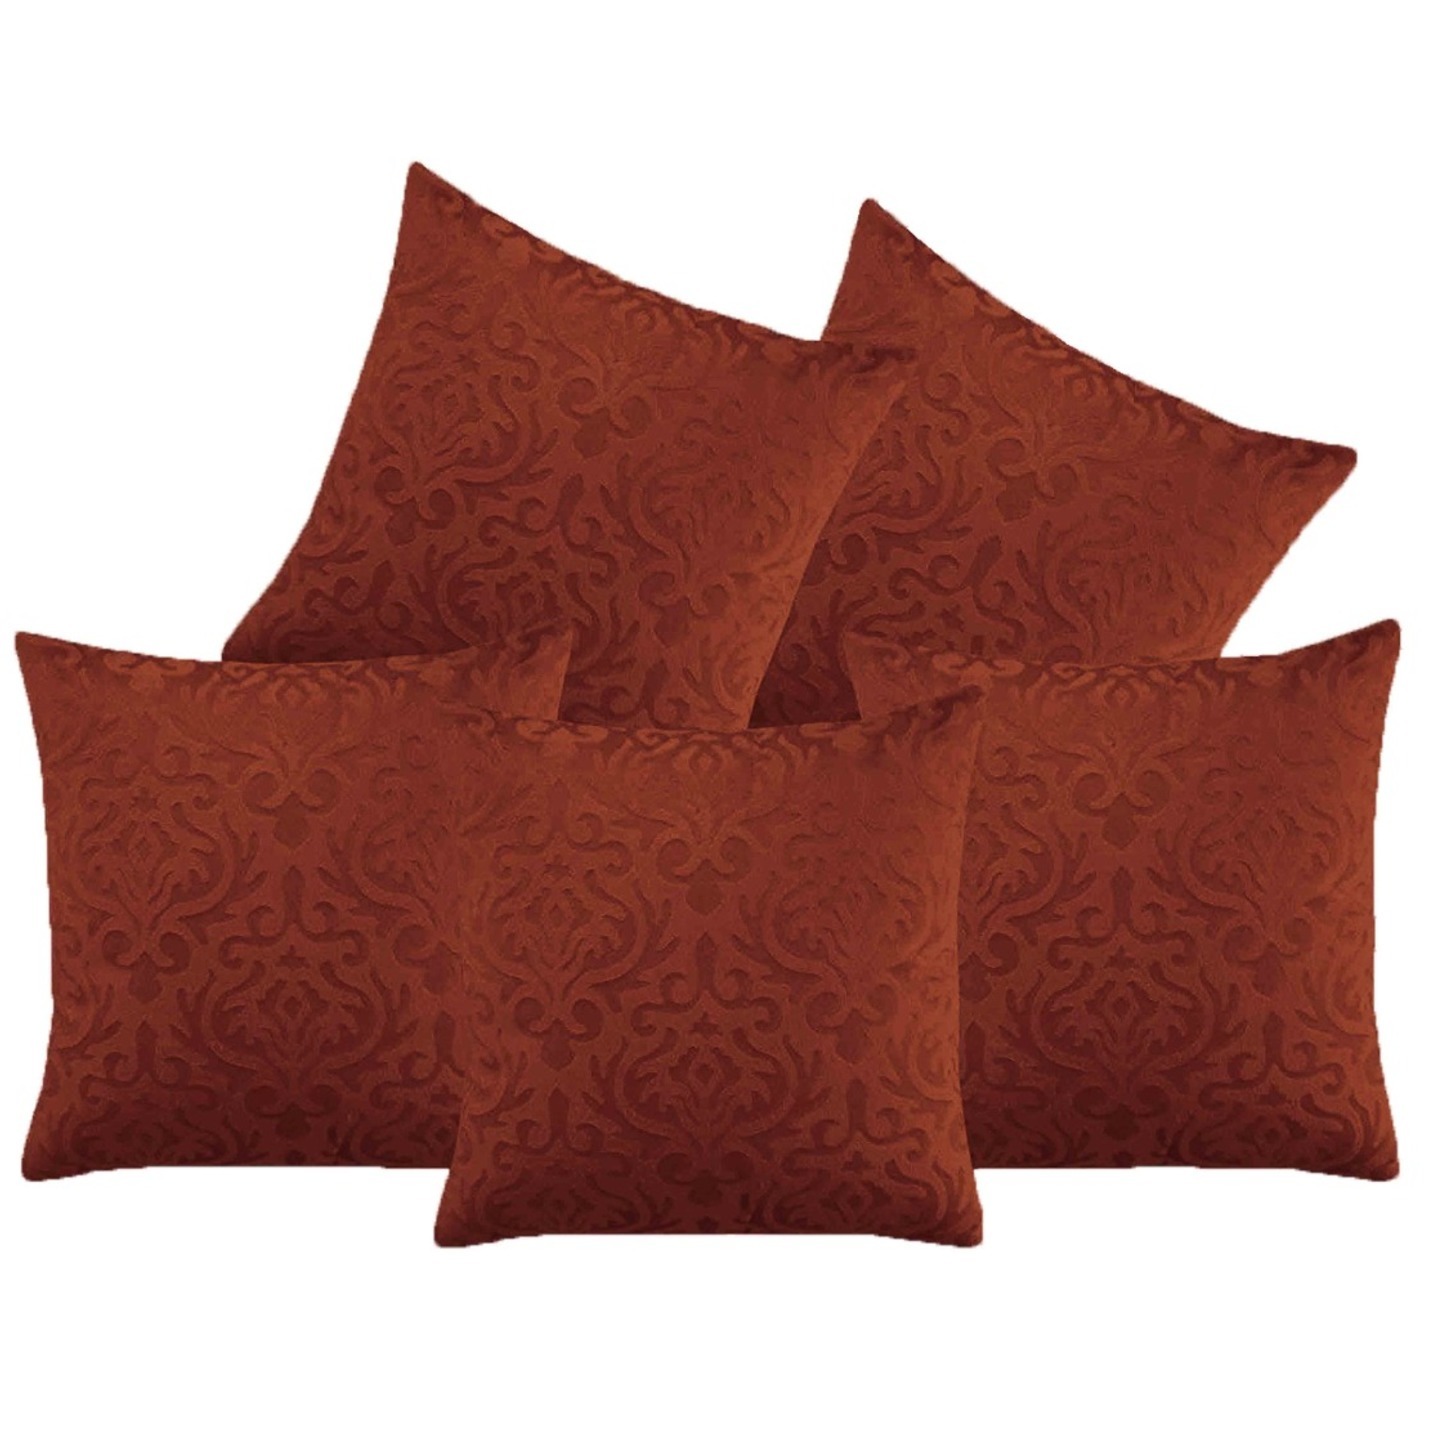 Handtex Home Velvet Cushion Covers (40.64x40.64 cm/16x16 inches, - Set of 5  G-Brown -Beige